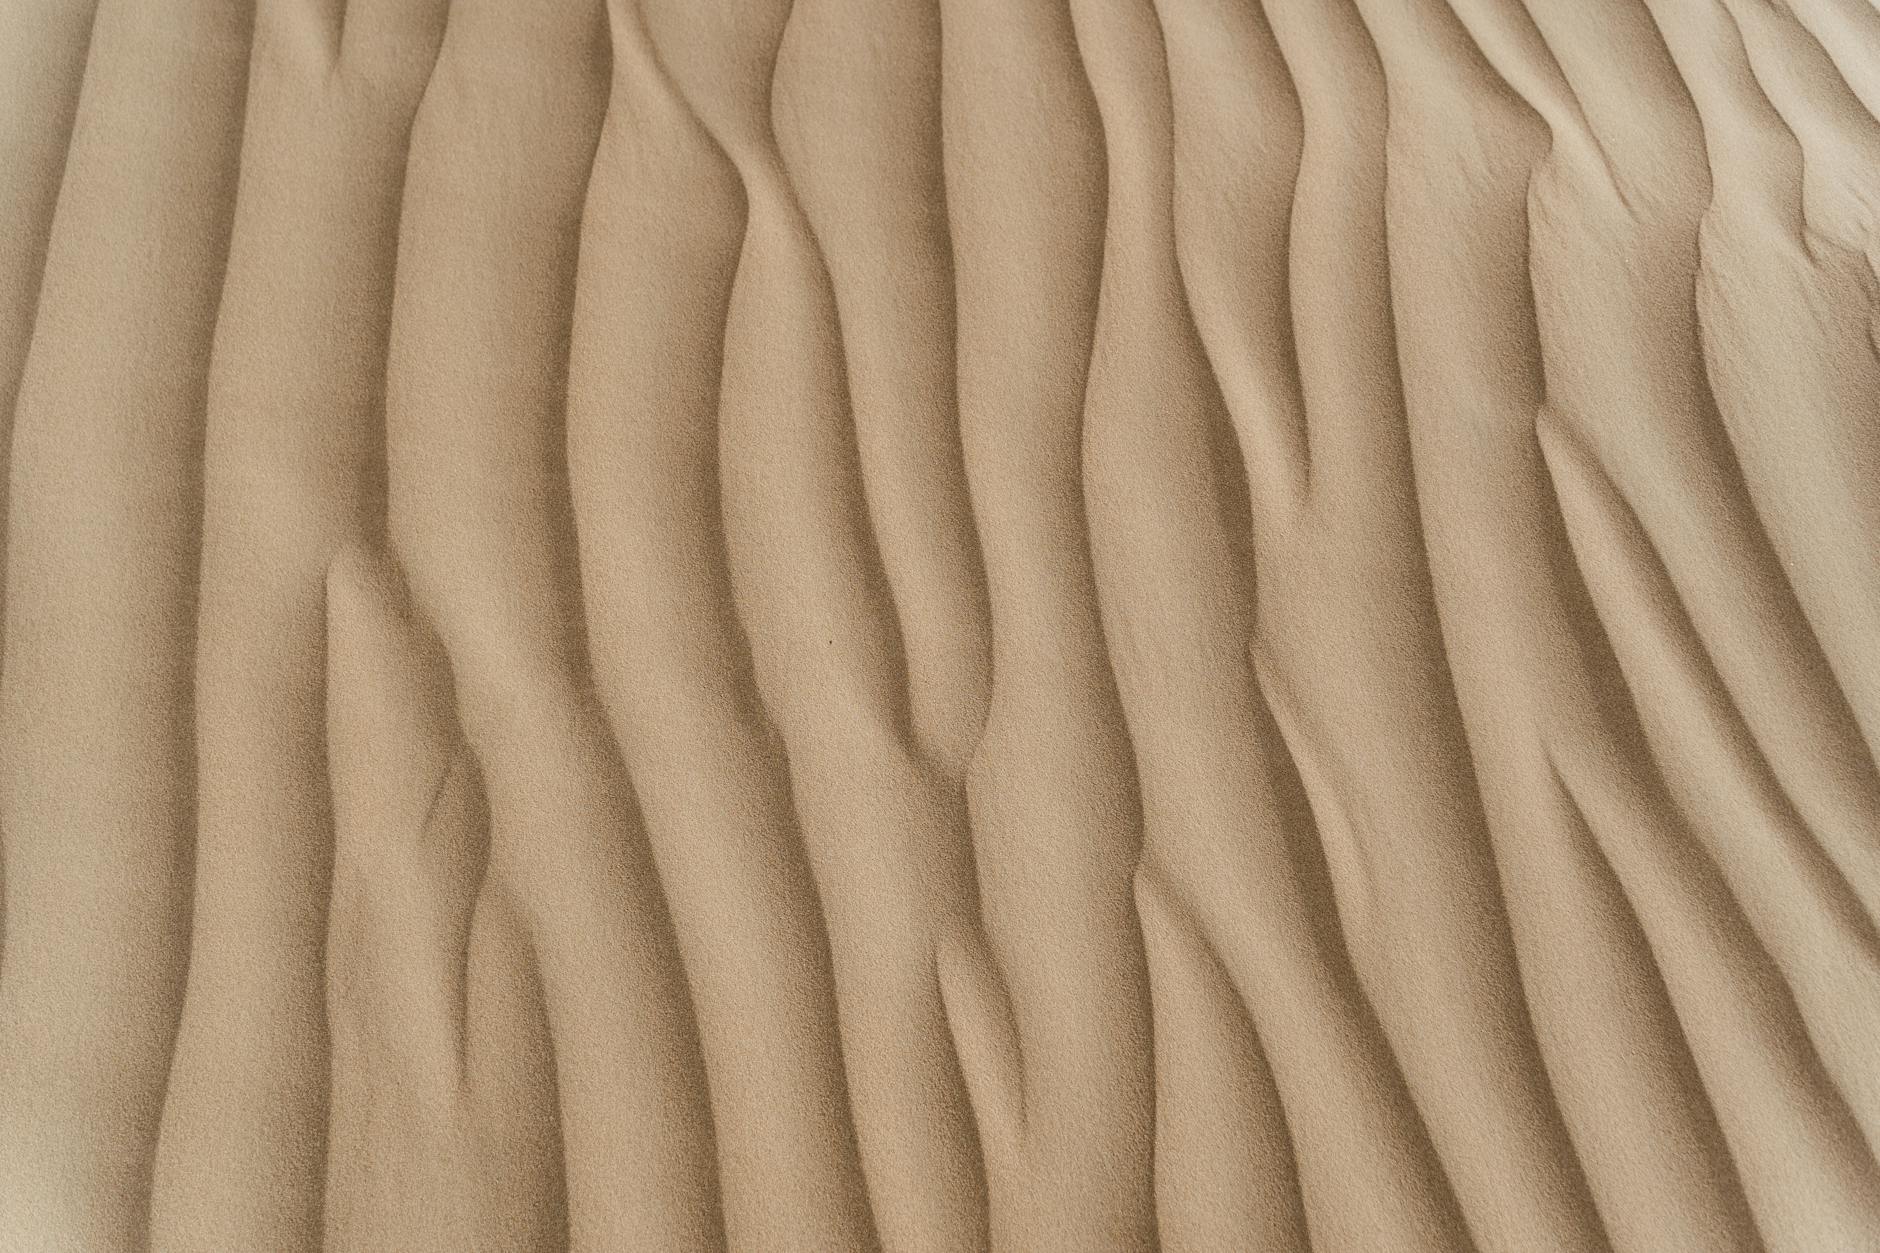 Brown Sand Close Up Photo · Free Stock Photo